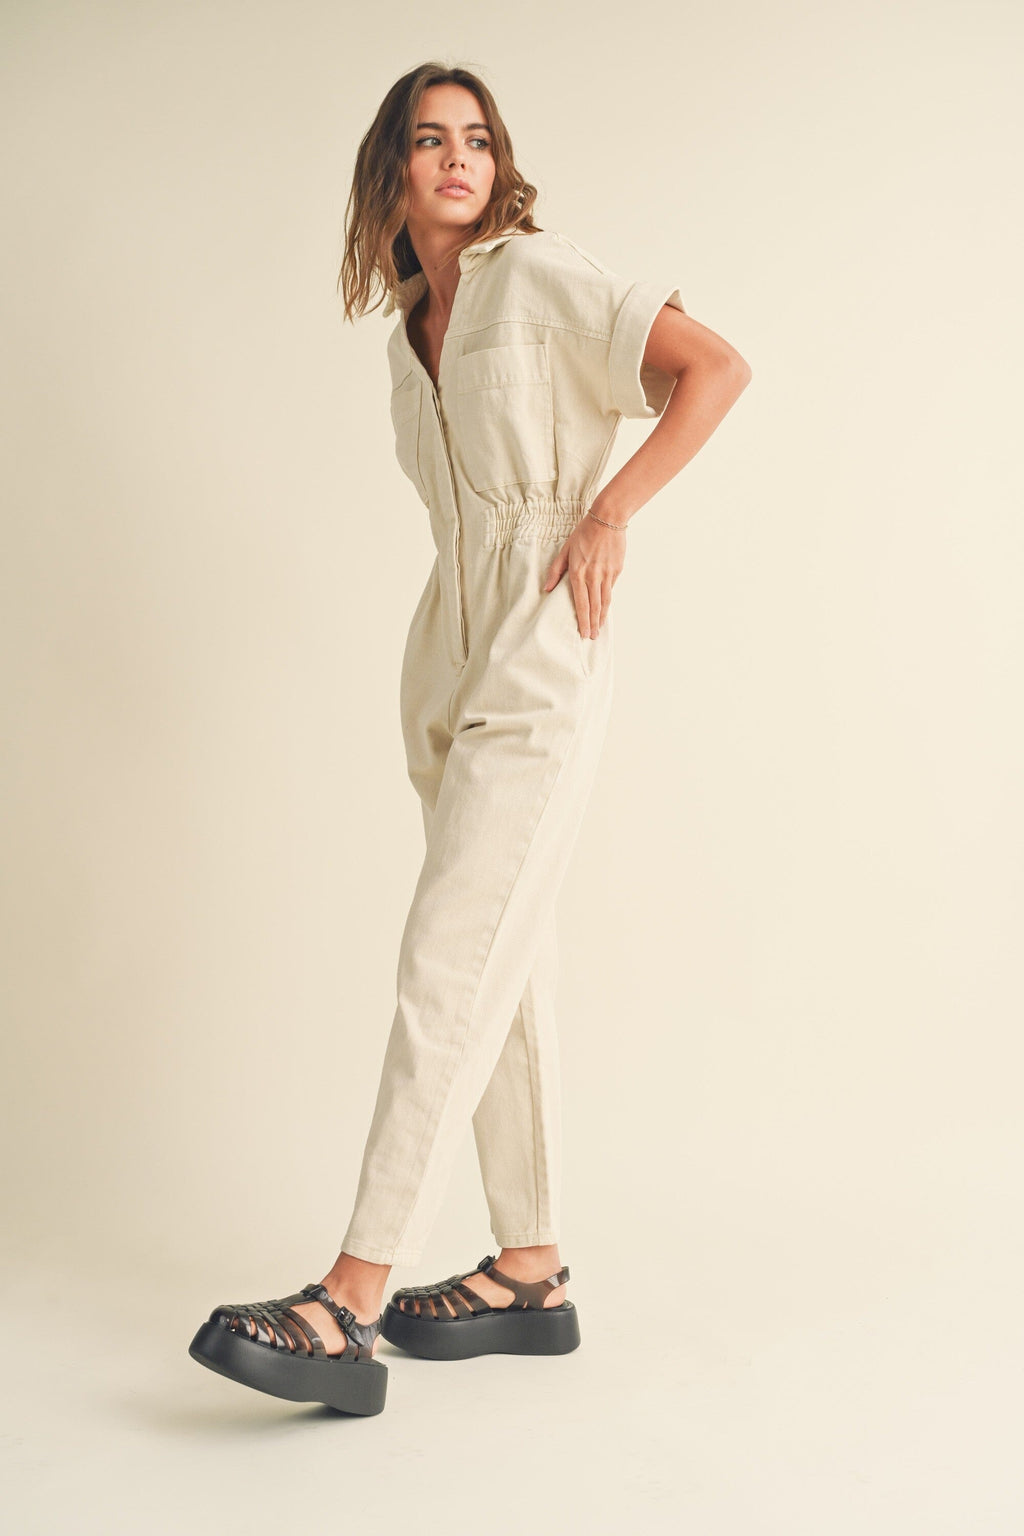 The Avery Short Sleeve Jumpsuit - Beige